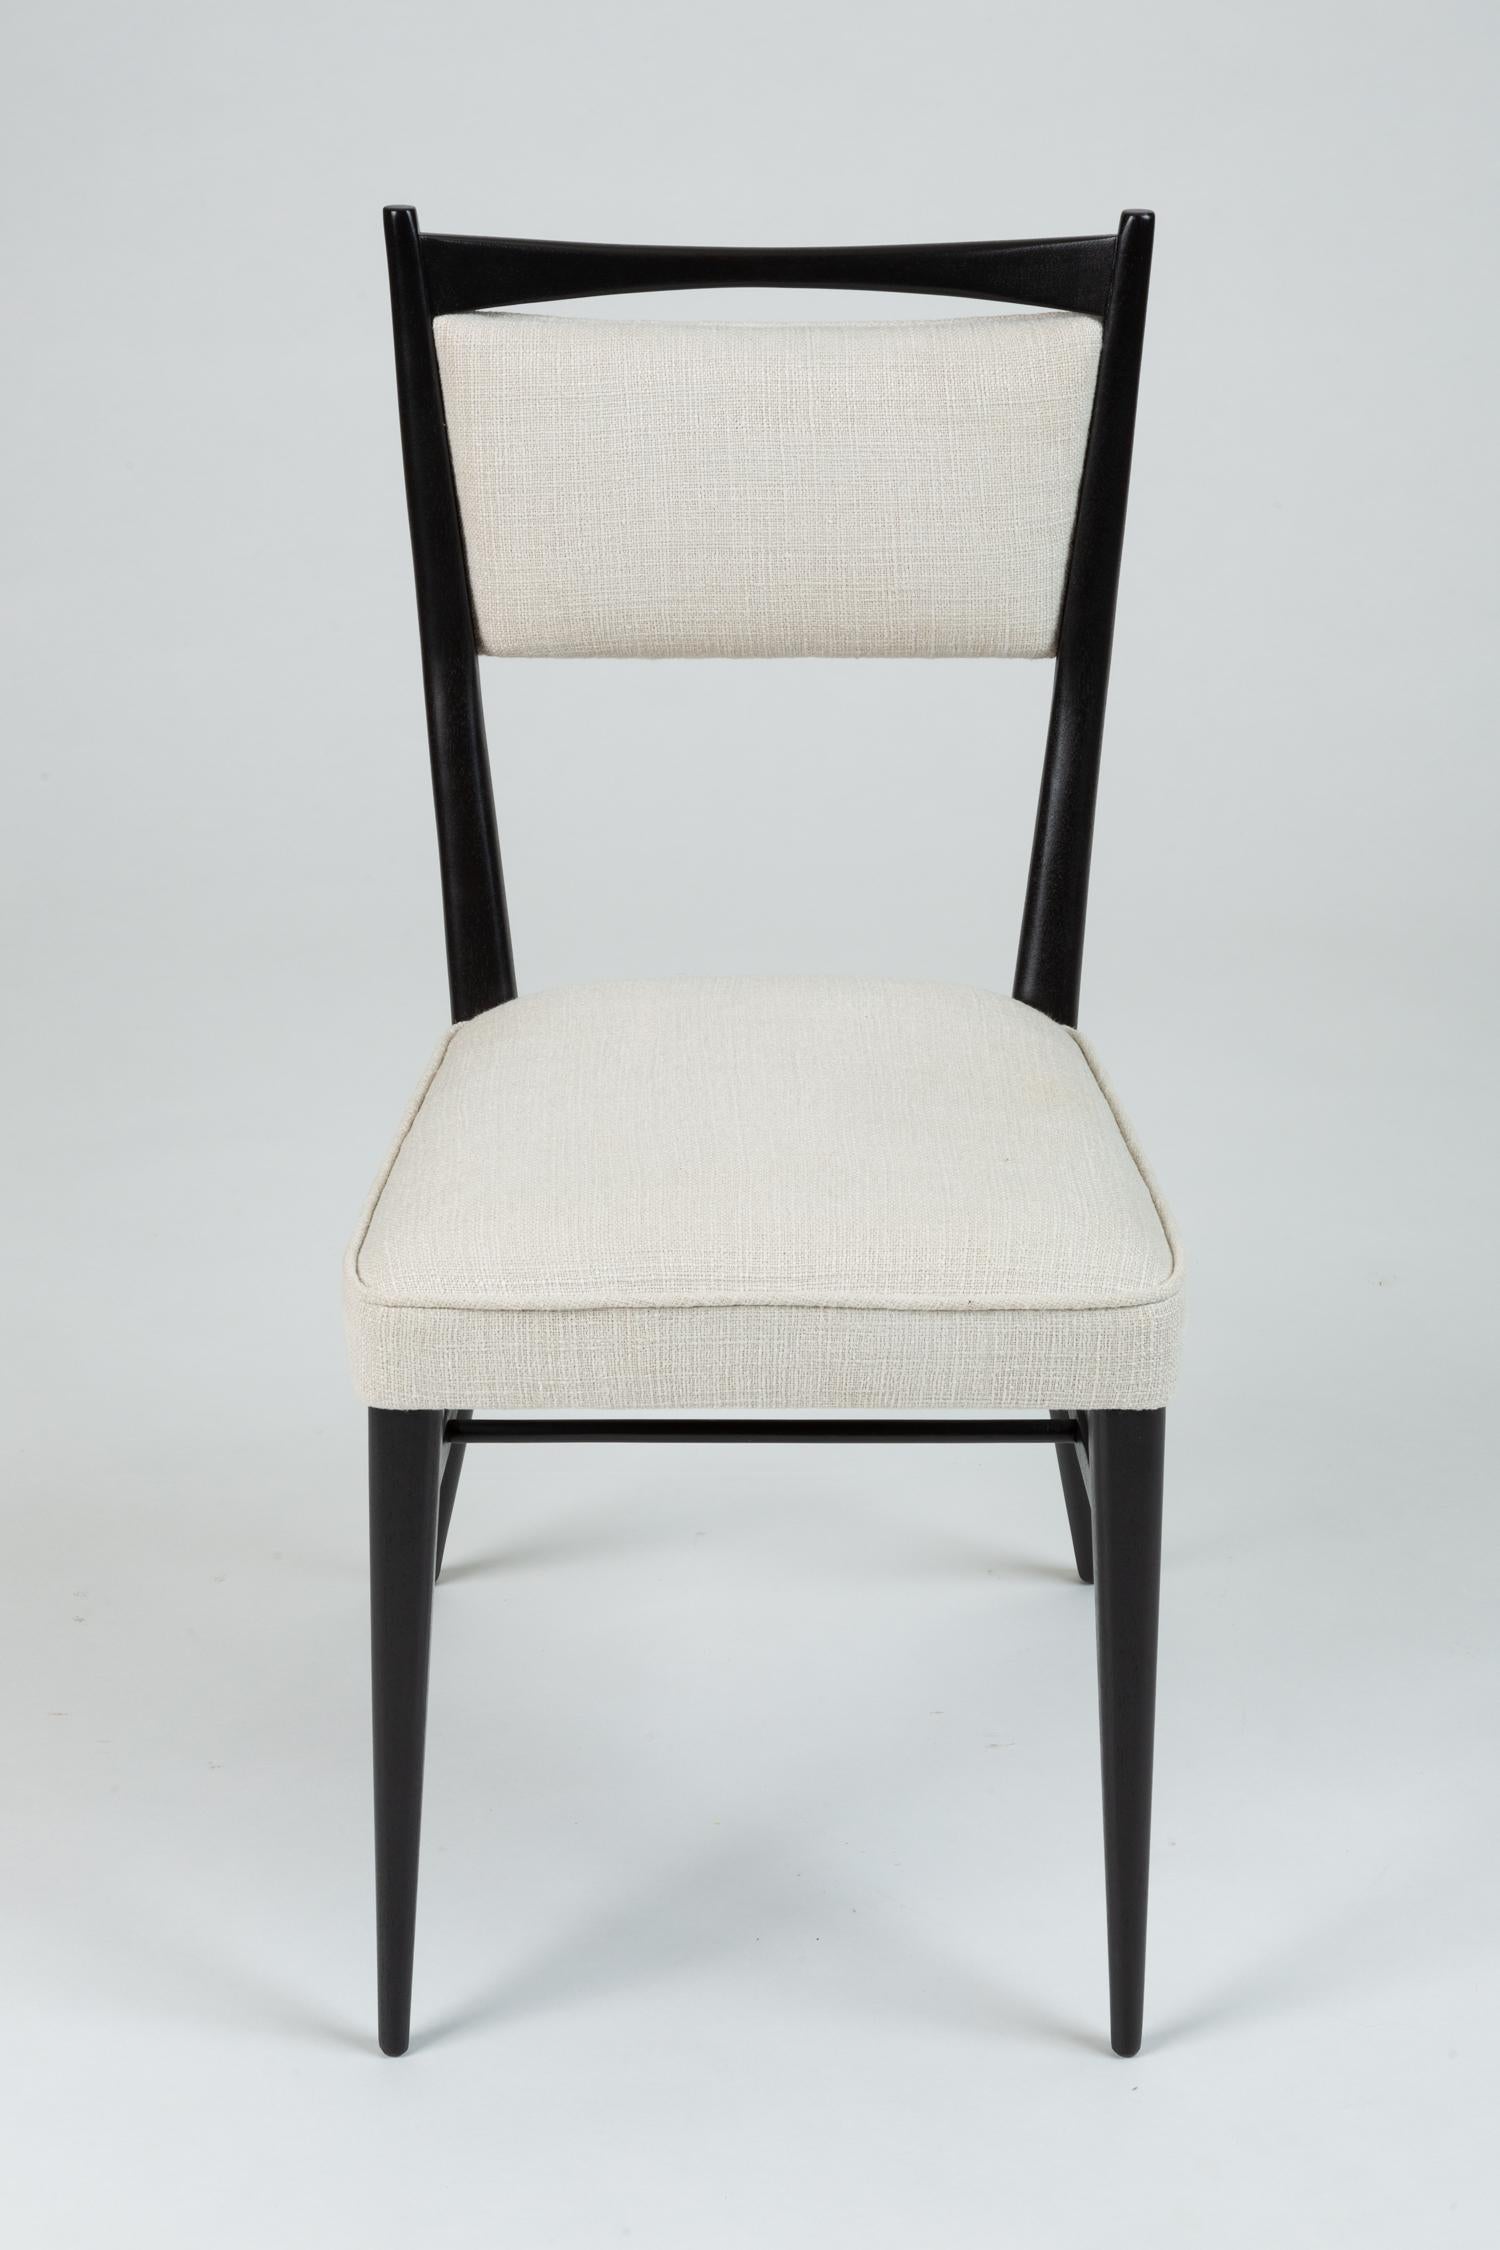 Mid-Century Modern Connoisseur Group Side Chair by Paul McCobb for H. Sacks and Sons